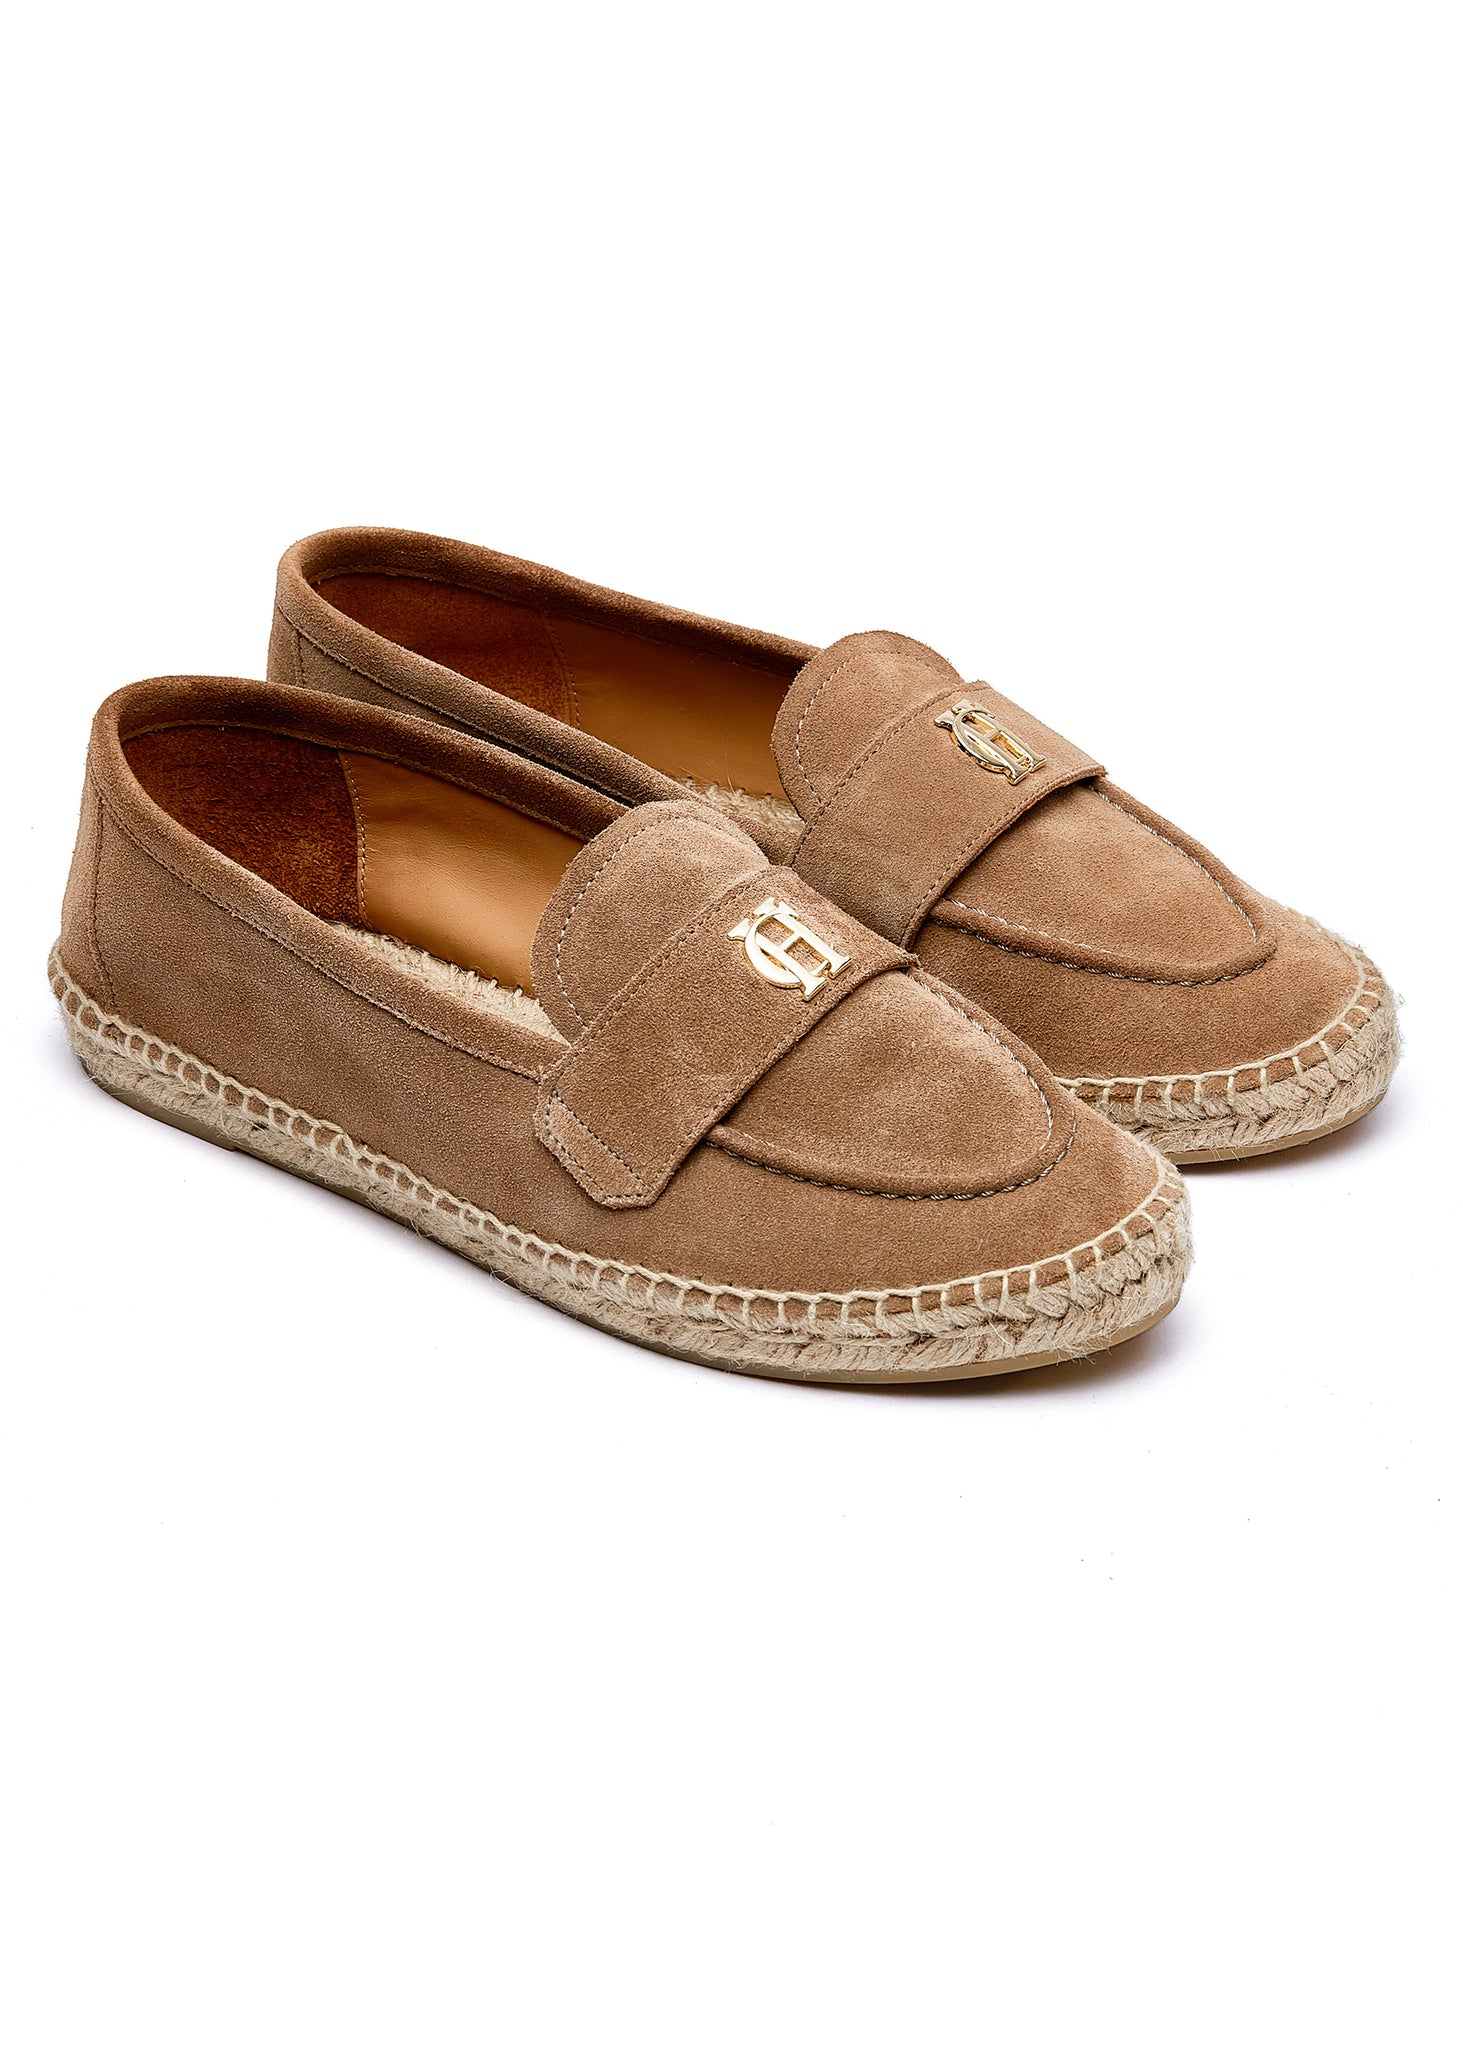 taupe suede espadrille with plaited jute sole and gold hardware on top